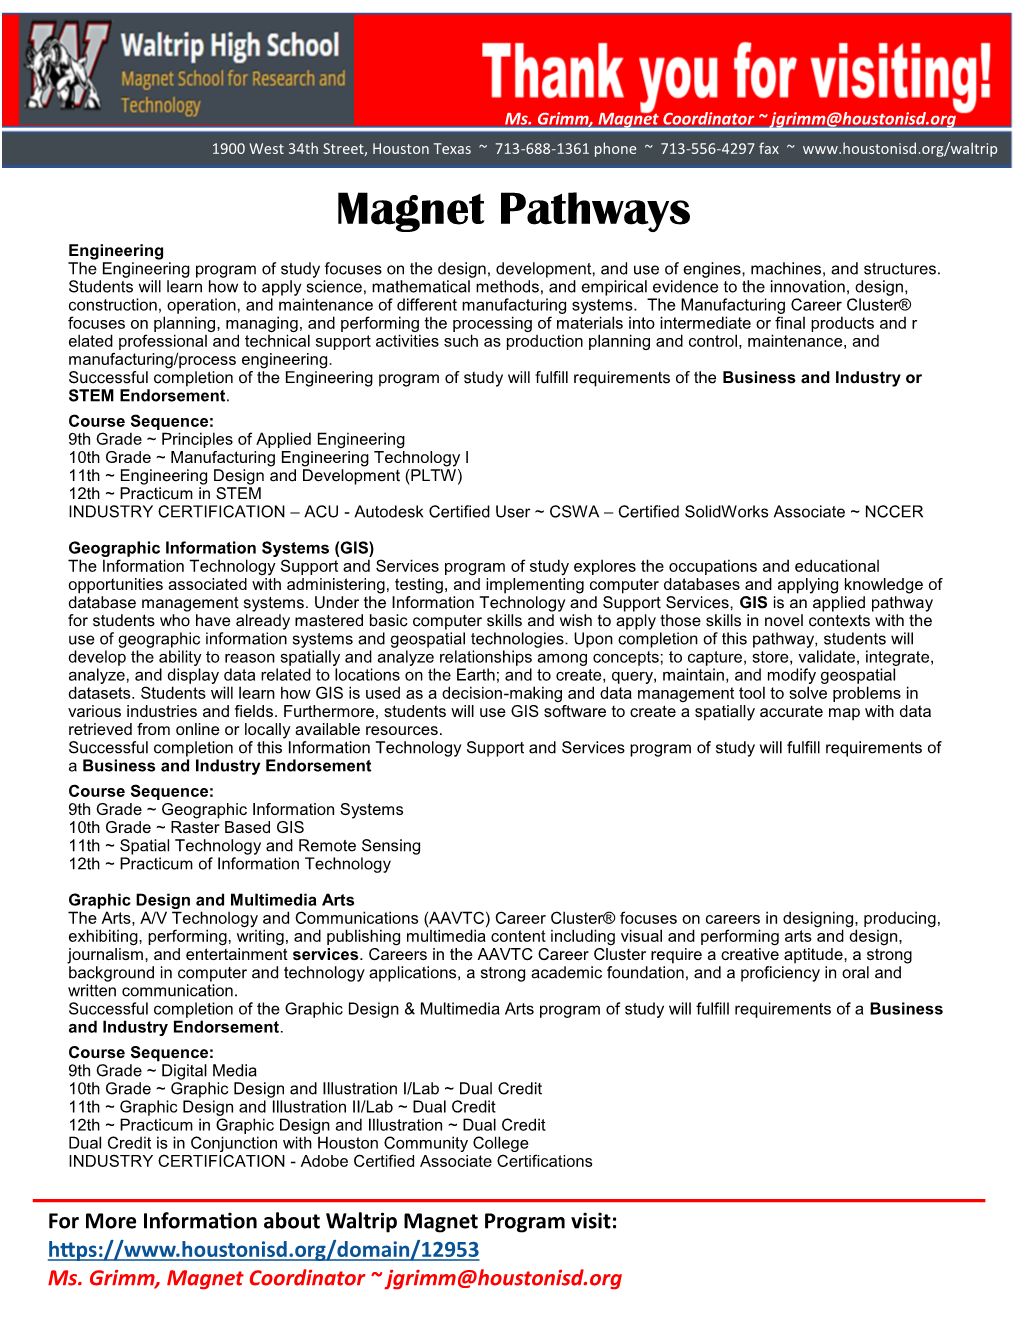 Magnet Pathways Engineering the Engineering Program of Study Focuses on the Design, Development, and Use of Engines, Machines, and Structures